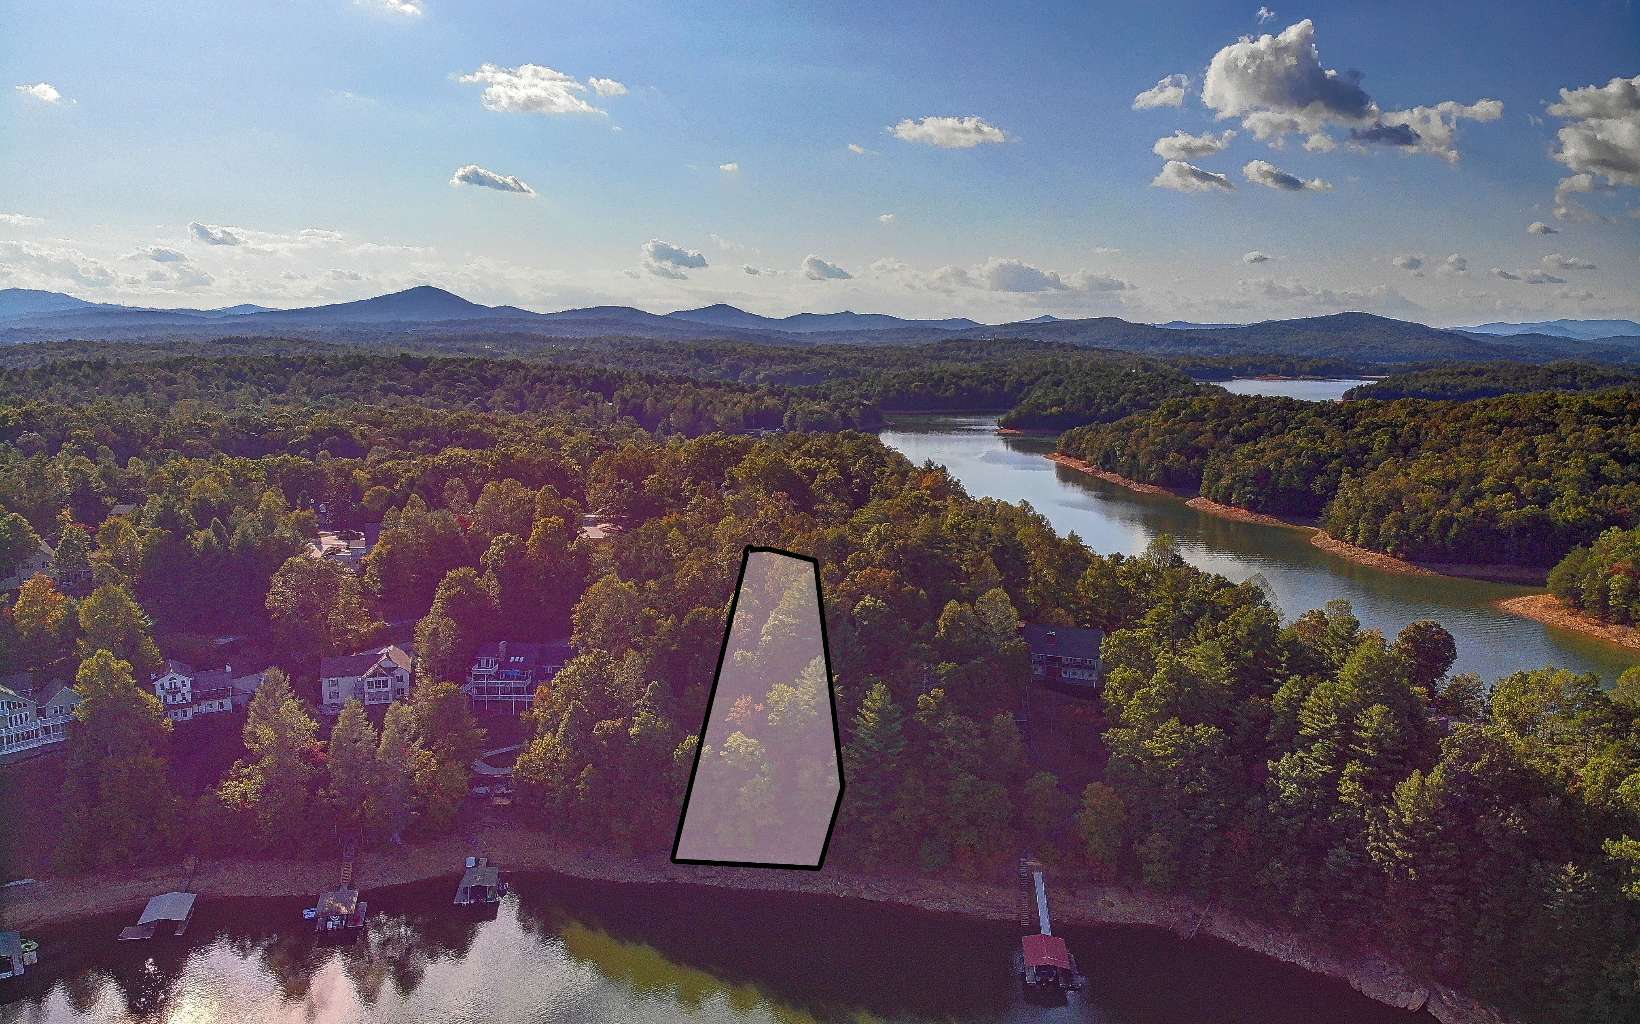 Sought after lakefront lot with deep year round water in Eagle Bend Subdivision. Great view of lake, mountains and Forest Service across the lake making this a rare and pristine view lot. Eagle Bend is a great established community with very nice homes, paved roads and private community boat ramp. Easy Access to Blairsville, Murphy and Blue Ridge. Septic system evaluation on file.